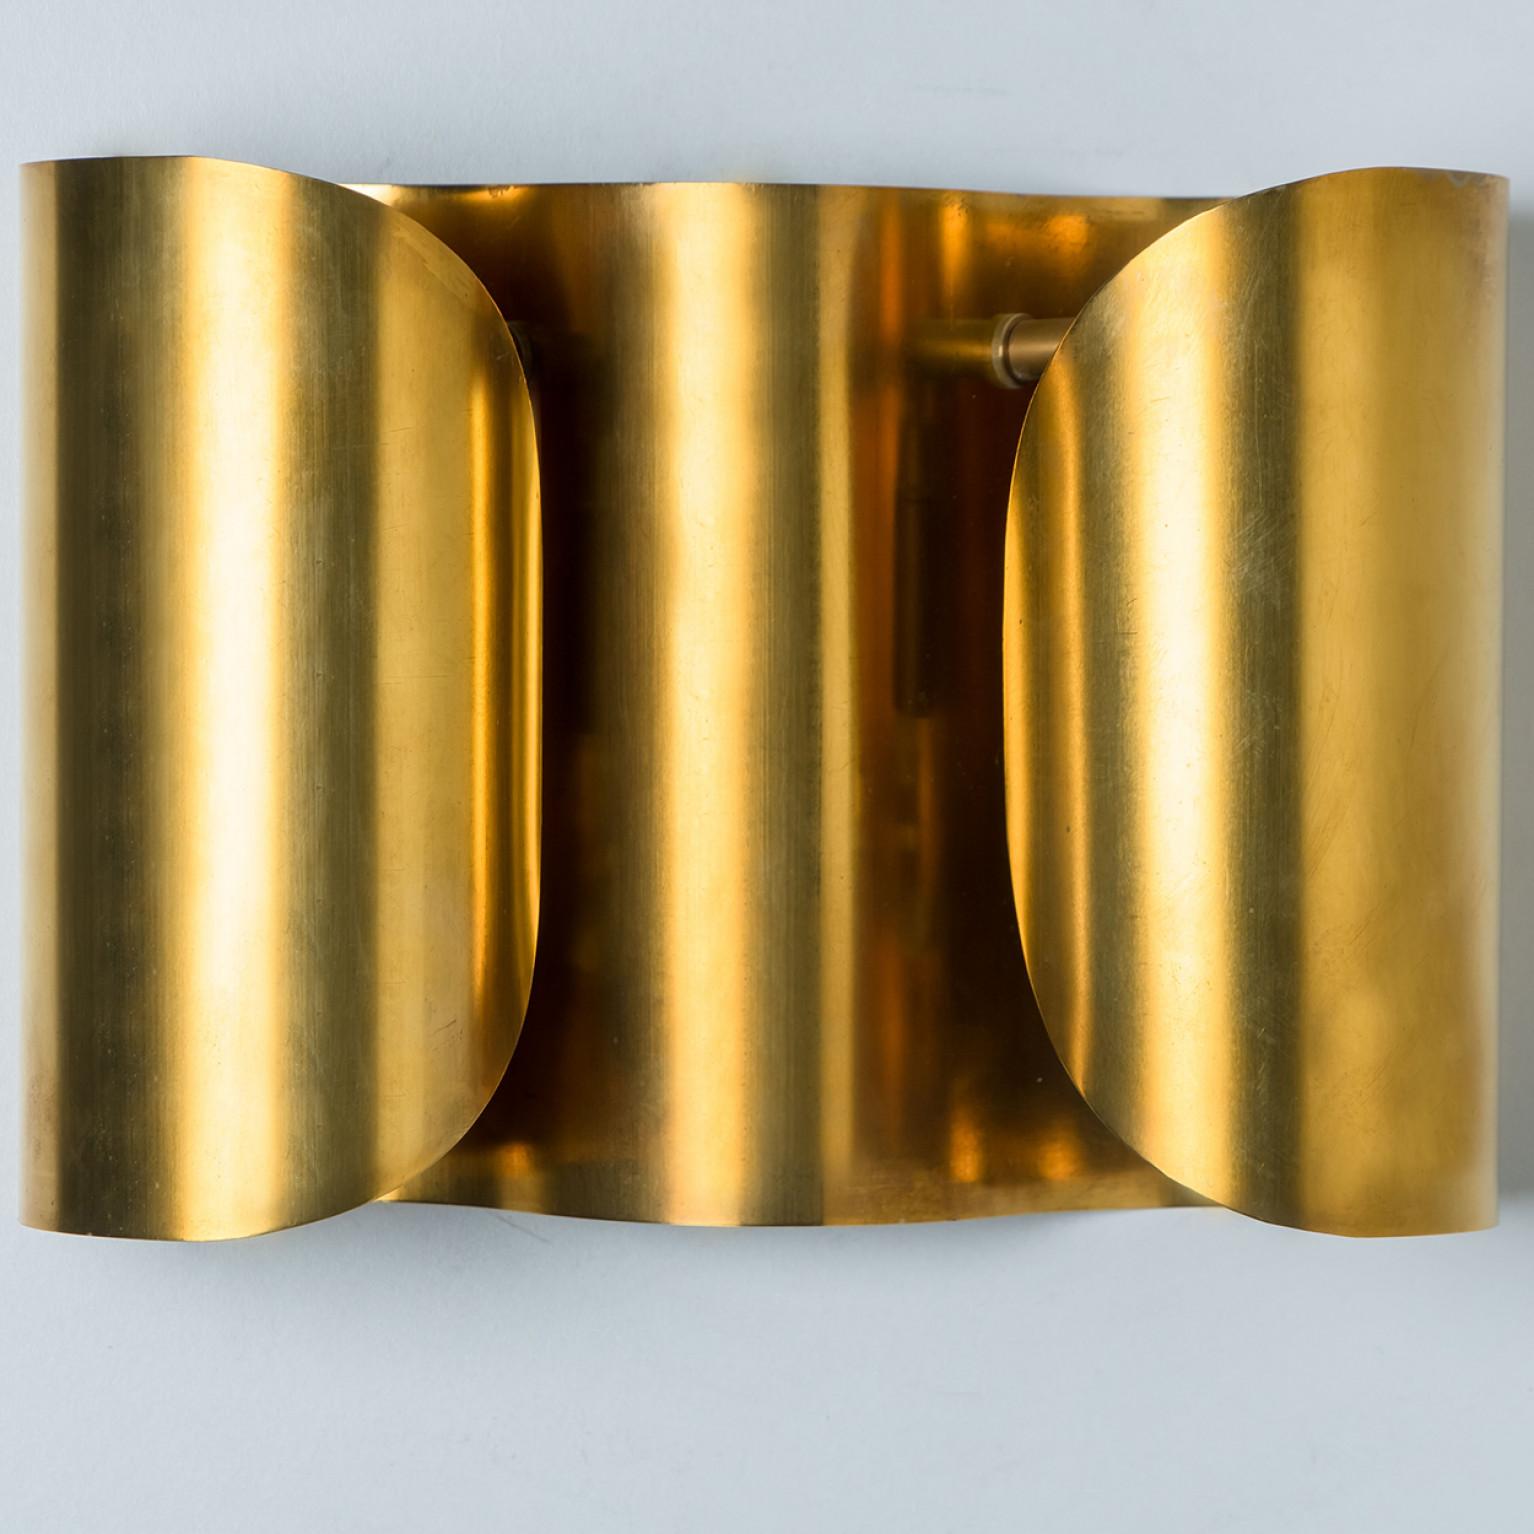 Several Curved Brass Wall Lights, 1970s For Sale 4